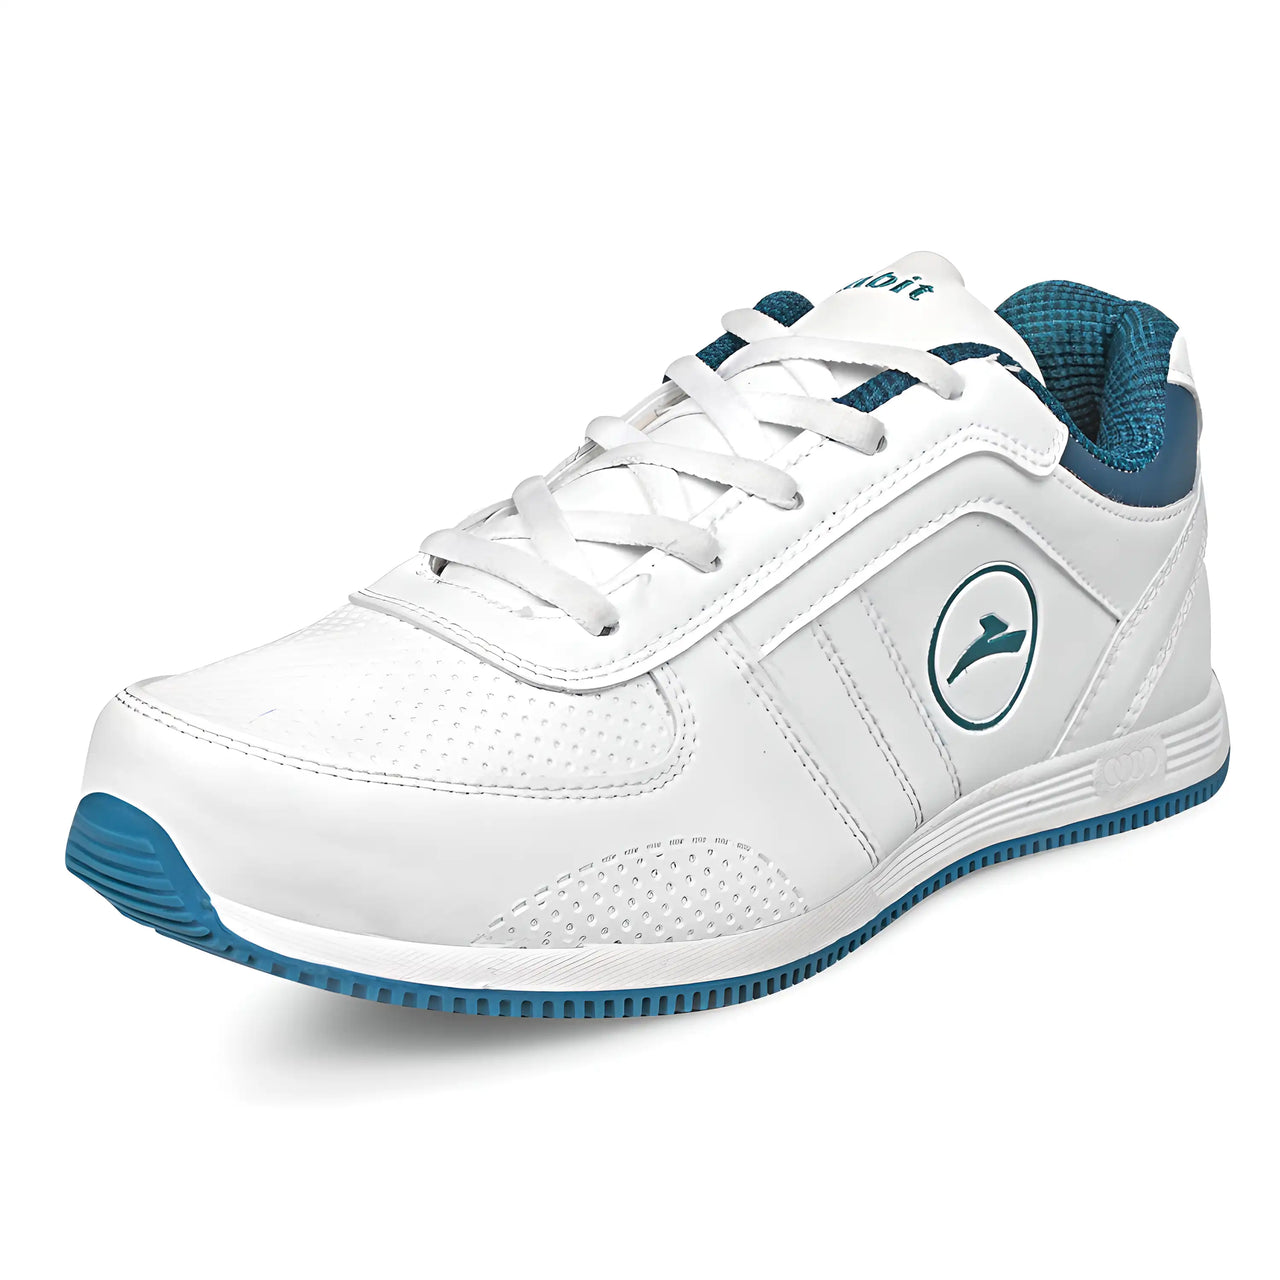 Men's Synthetic Stylish Sports Shoes